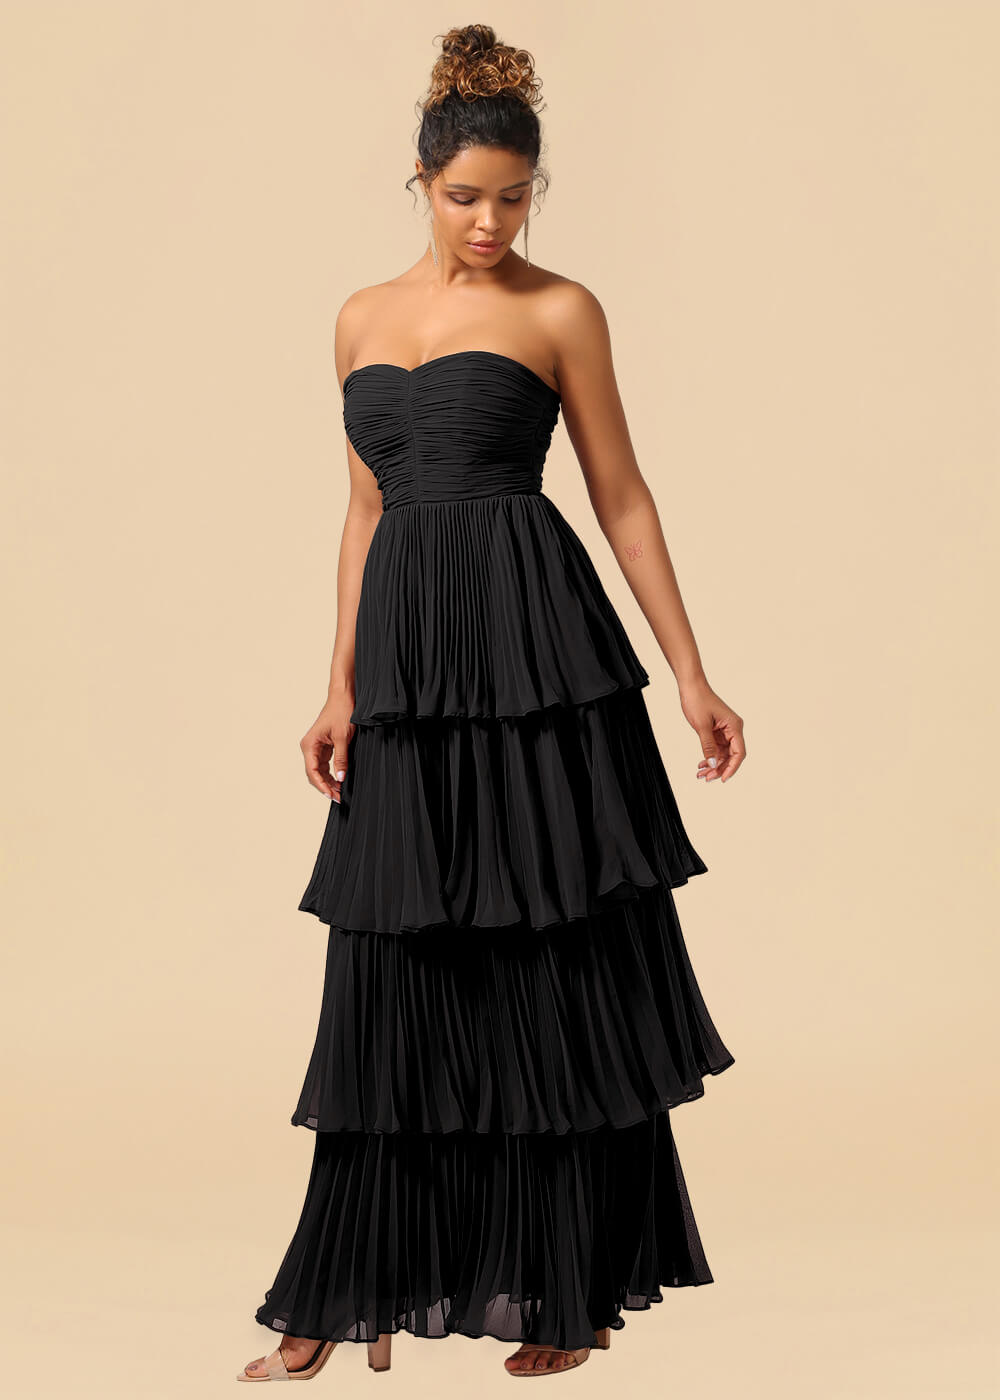 Strapless Tiered Chiffon Pleated A-line Floor Length Bridesmaid Dress